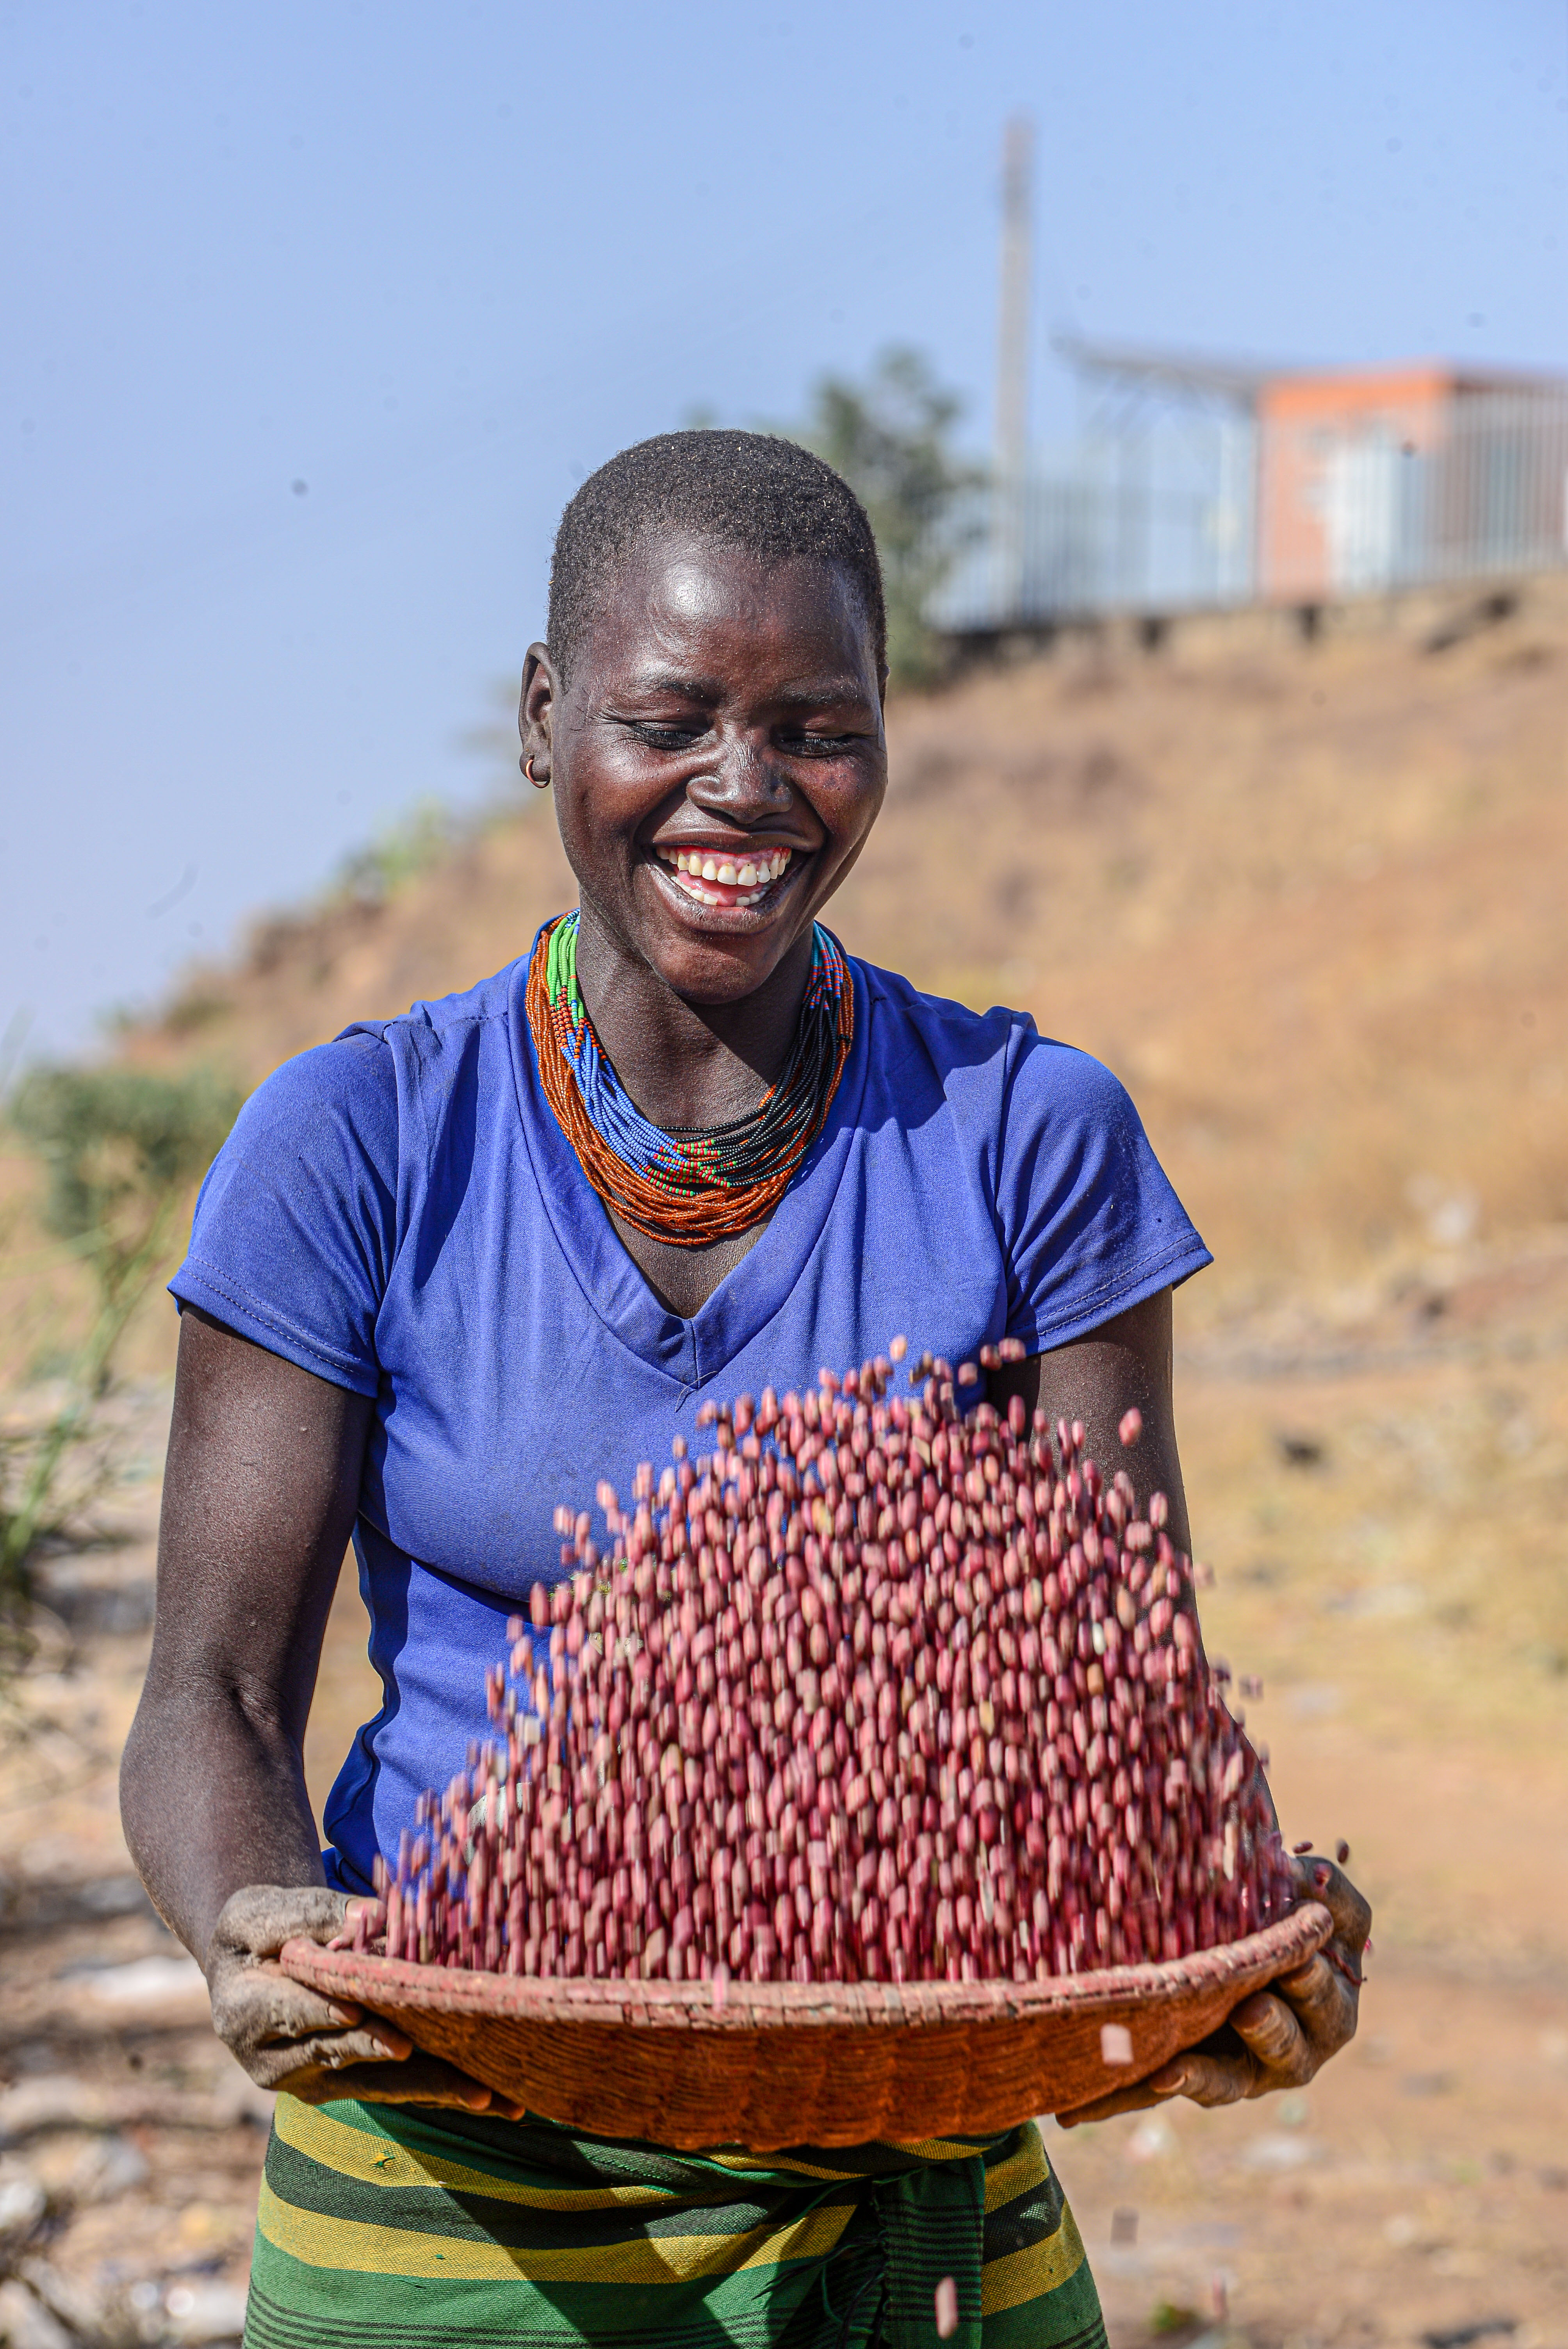 MAKING MONEY AND IMPROVING NUTRITION THROUGH INVESTMENT IN IRON RICH BEANS